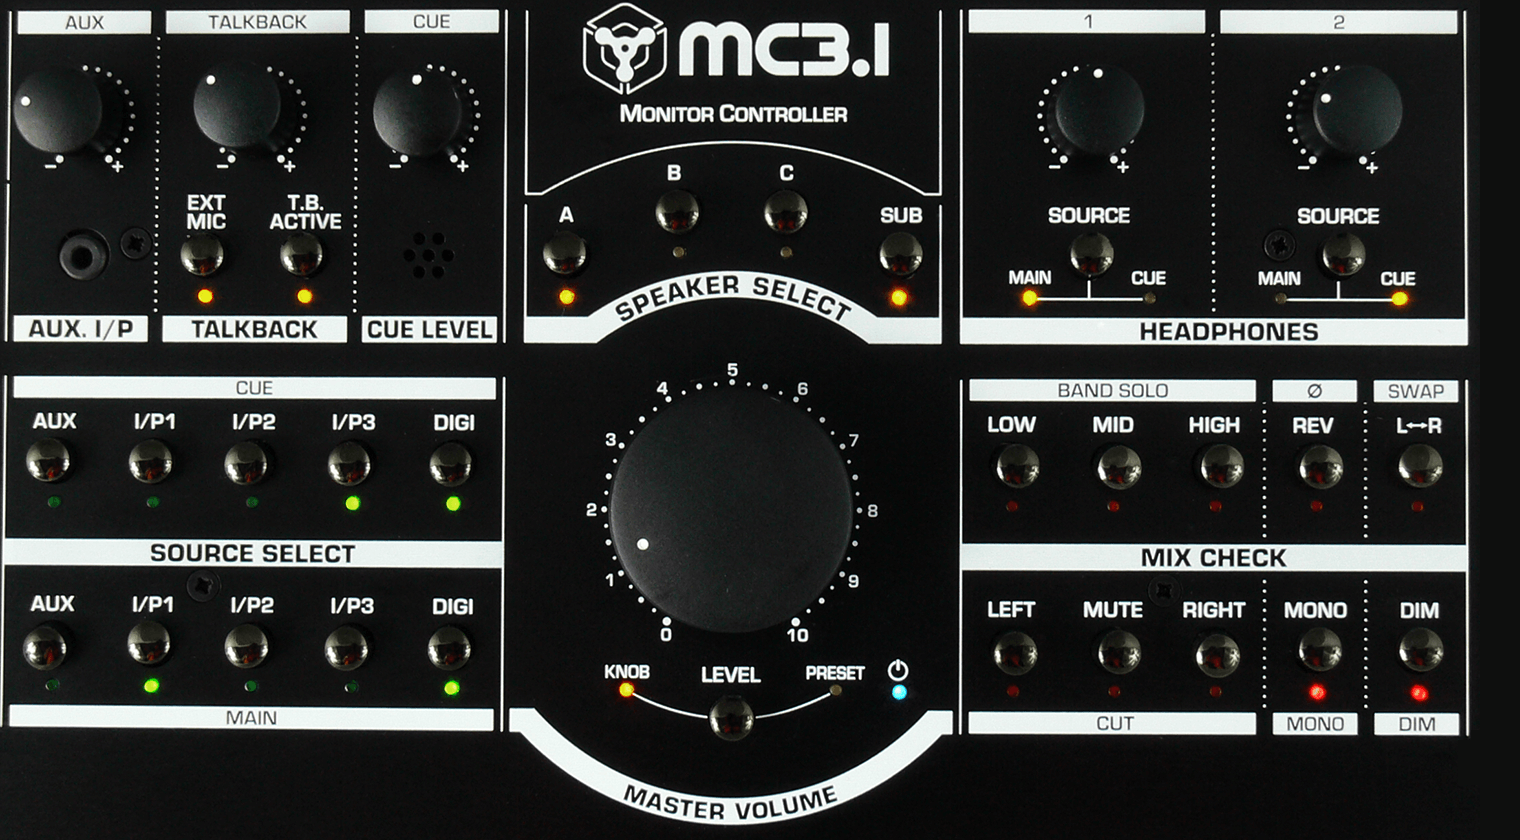 The various front panel controls of the MC3.1